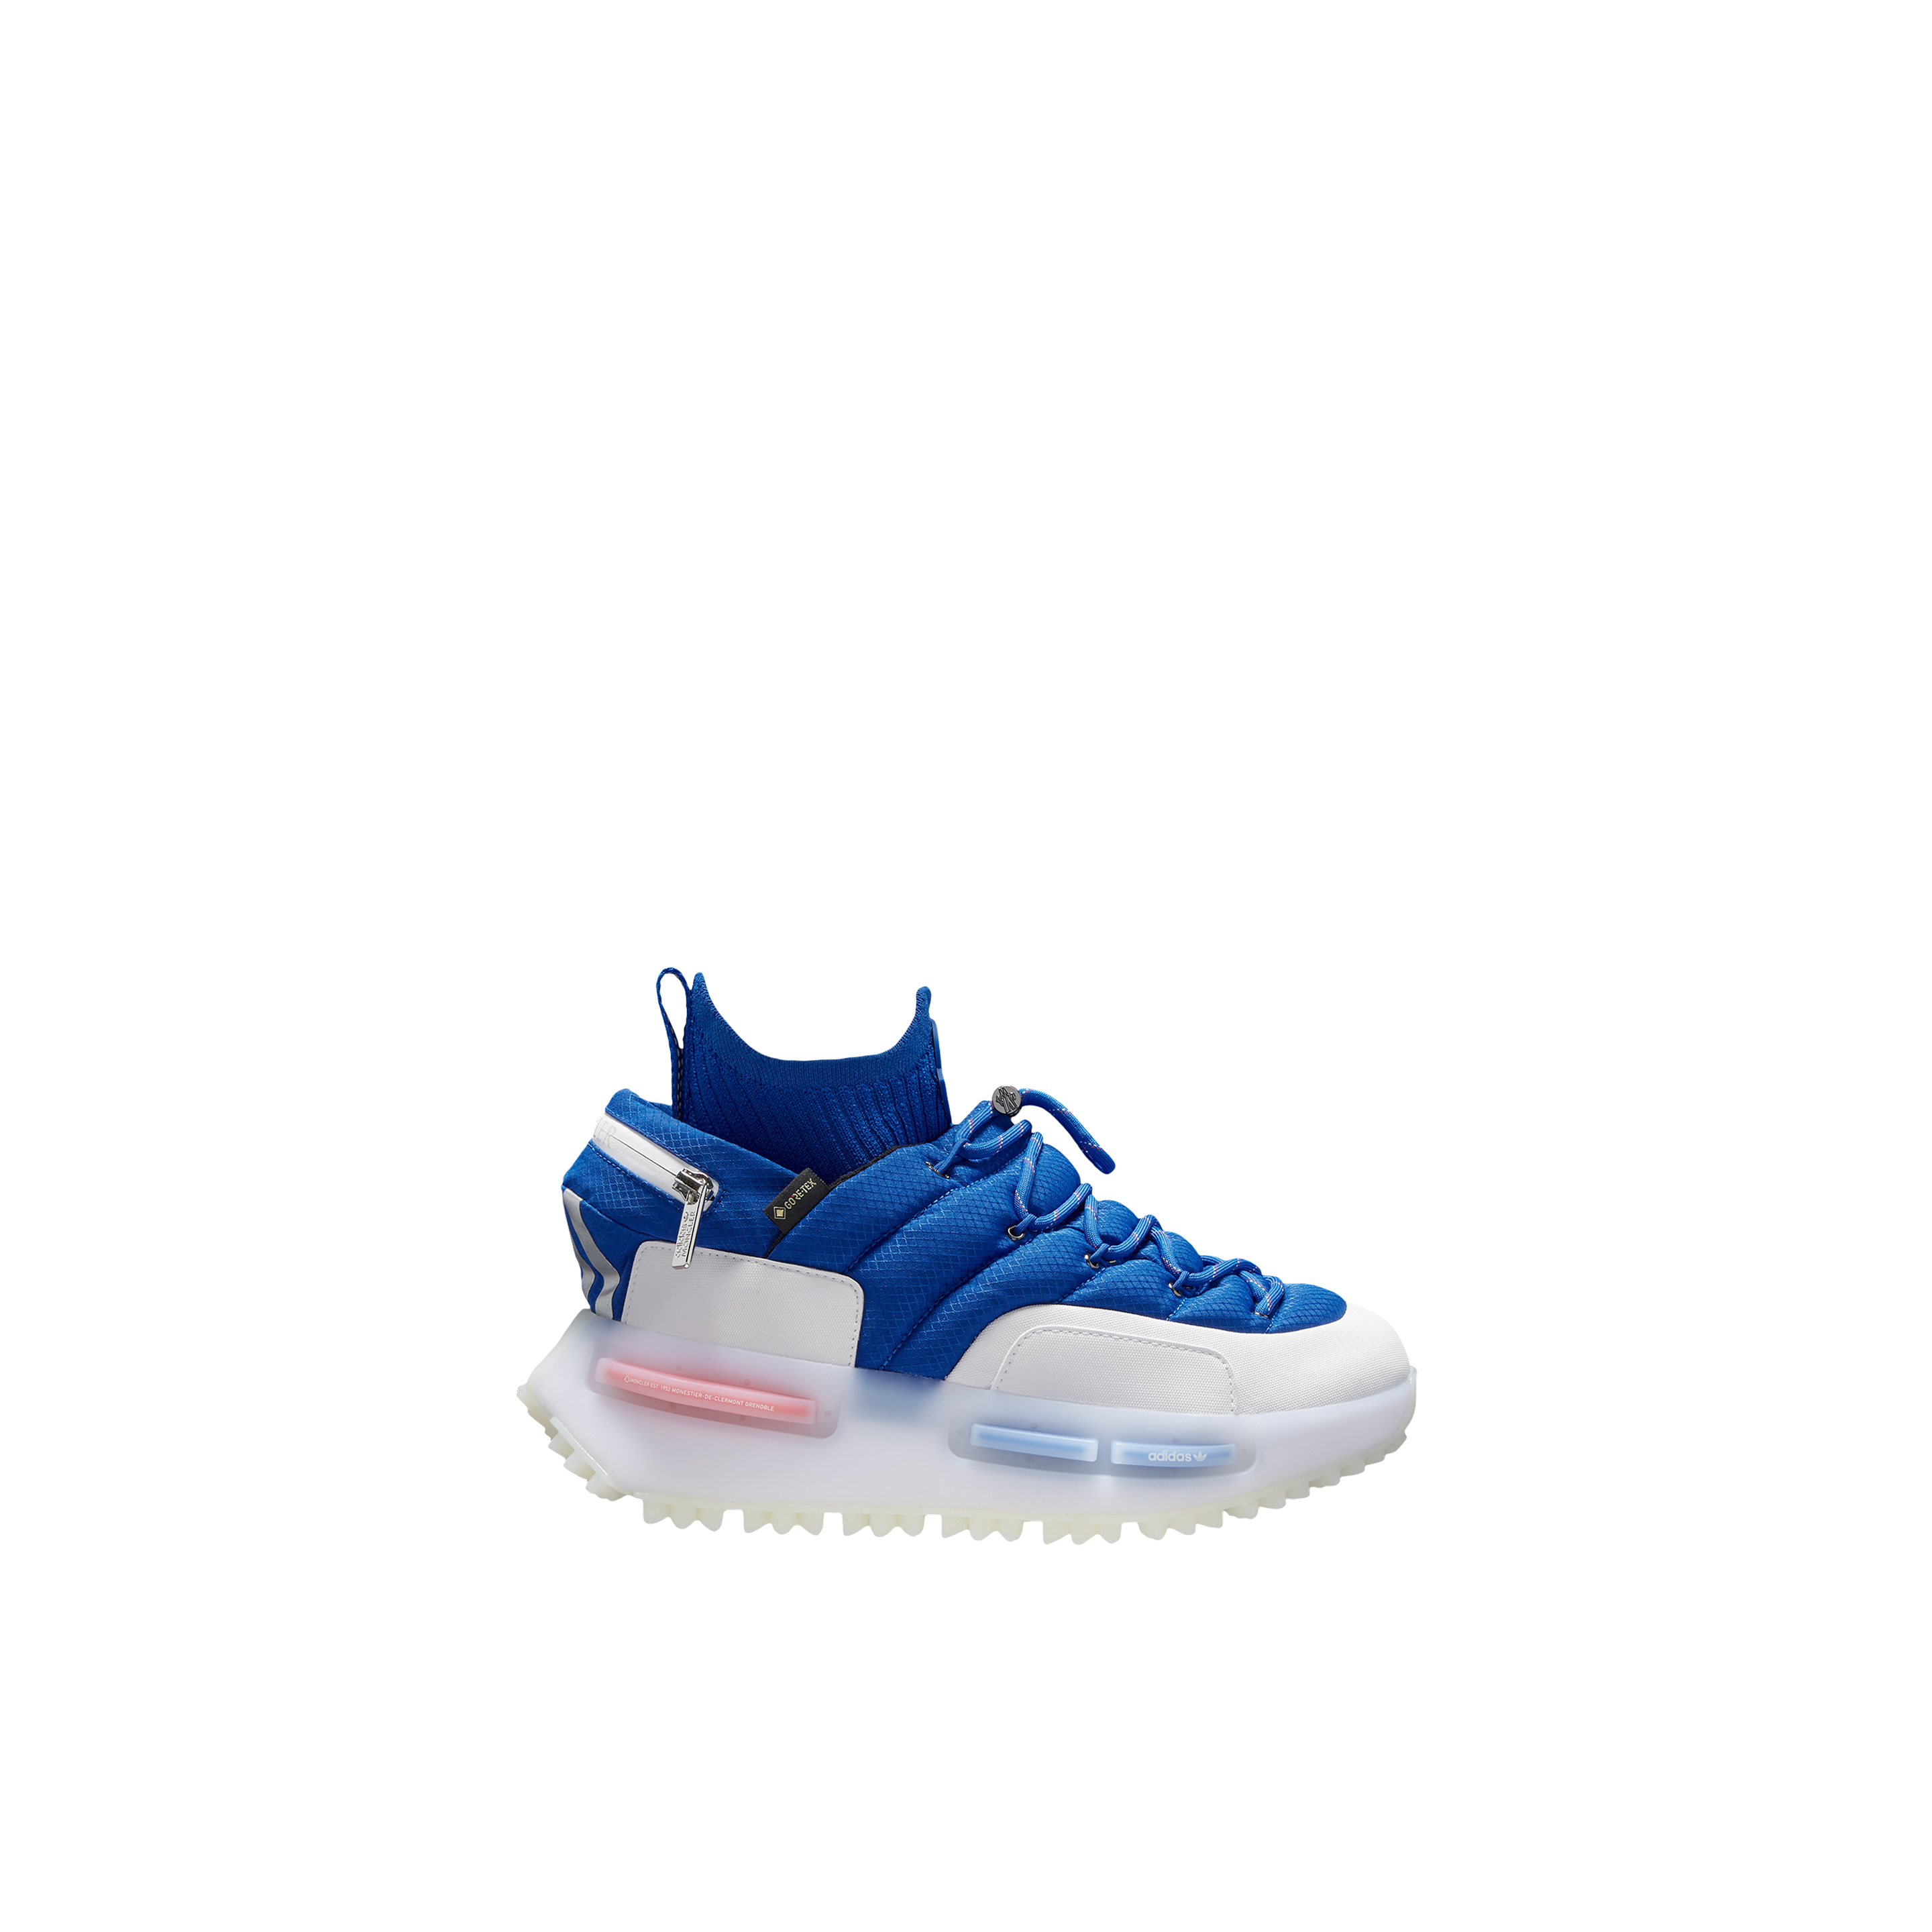 Moncler X Adidas Nmd S1 Sneakers In Blue